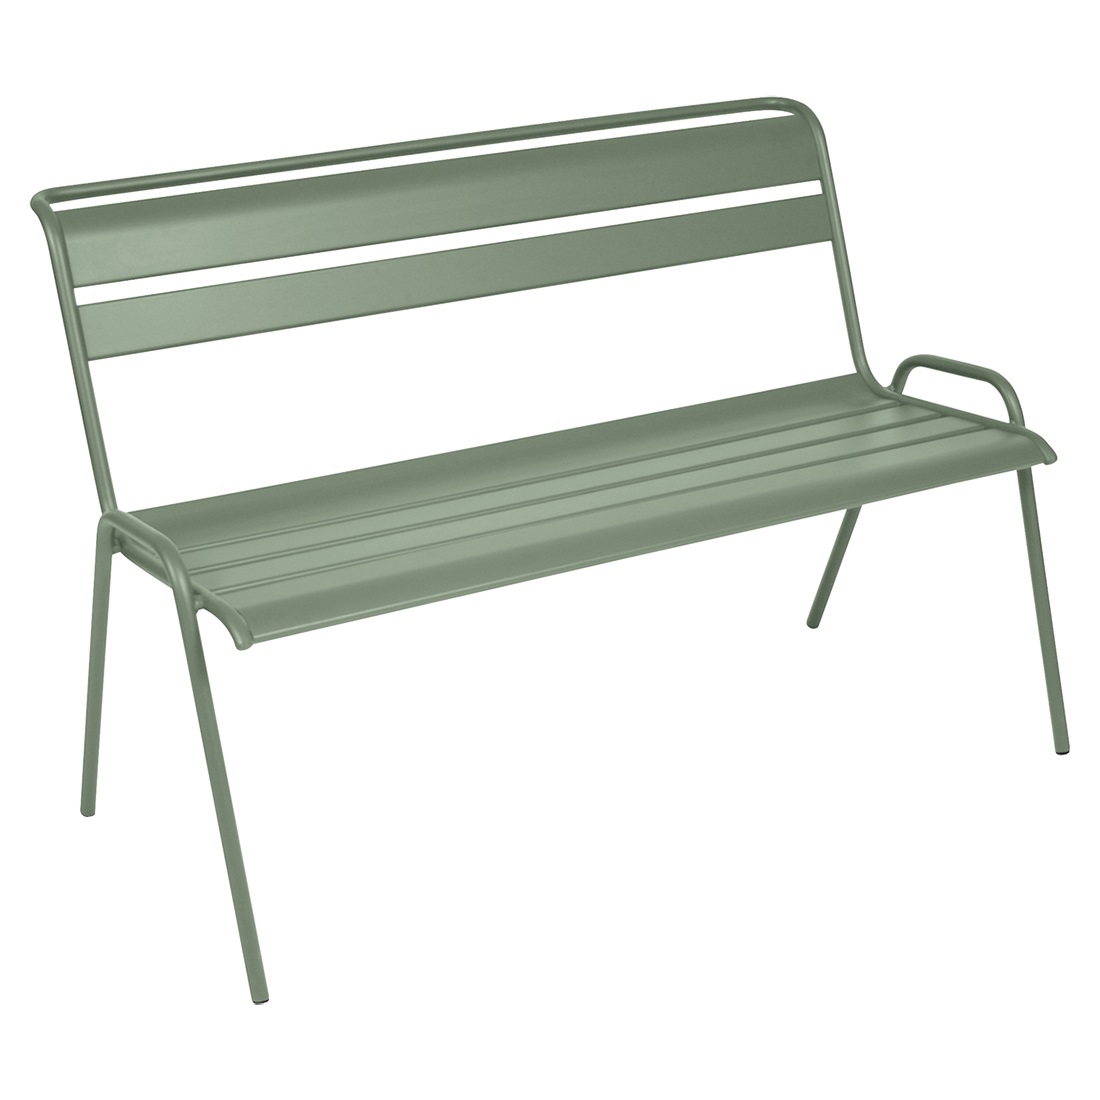 Monceau bench made by Fermob, available from le petit jardin